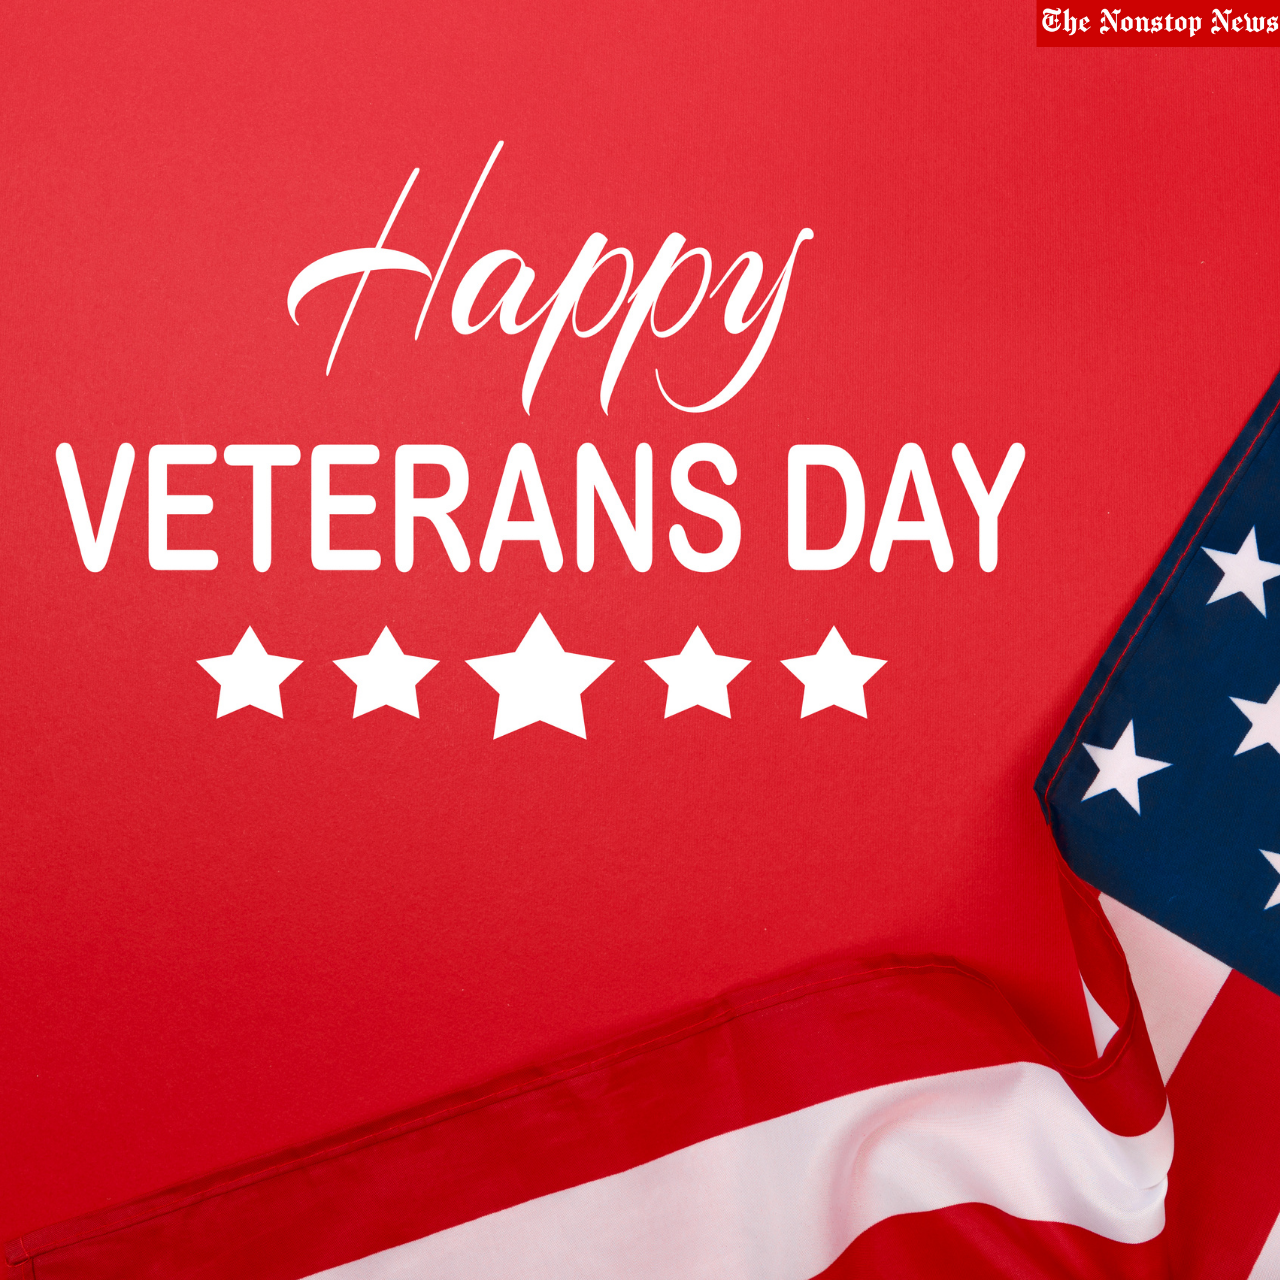 Veterans Day 2021 Wishes, Quotes, Sayings, Slogans, and Messages to honor US Veterans